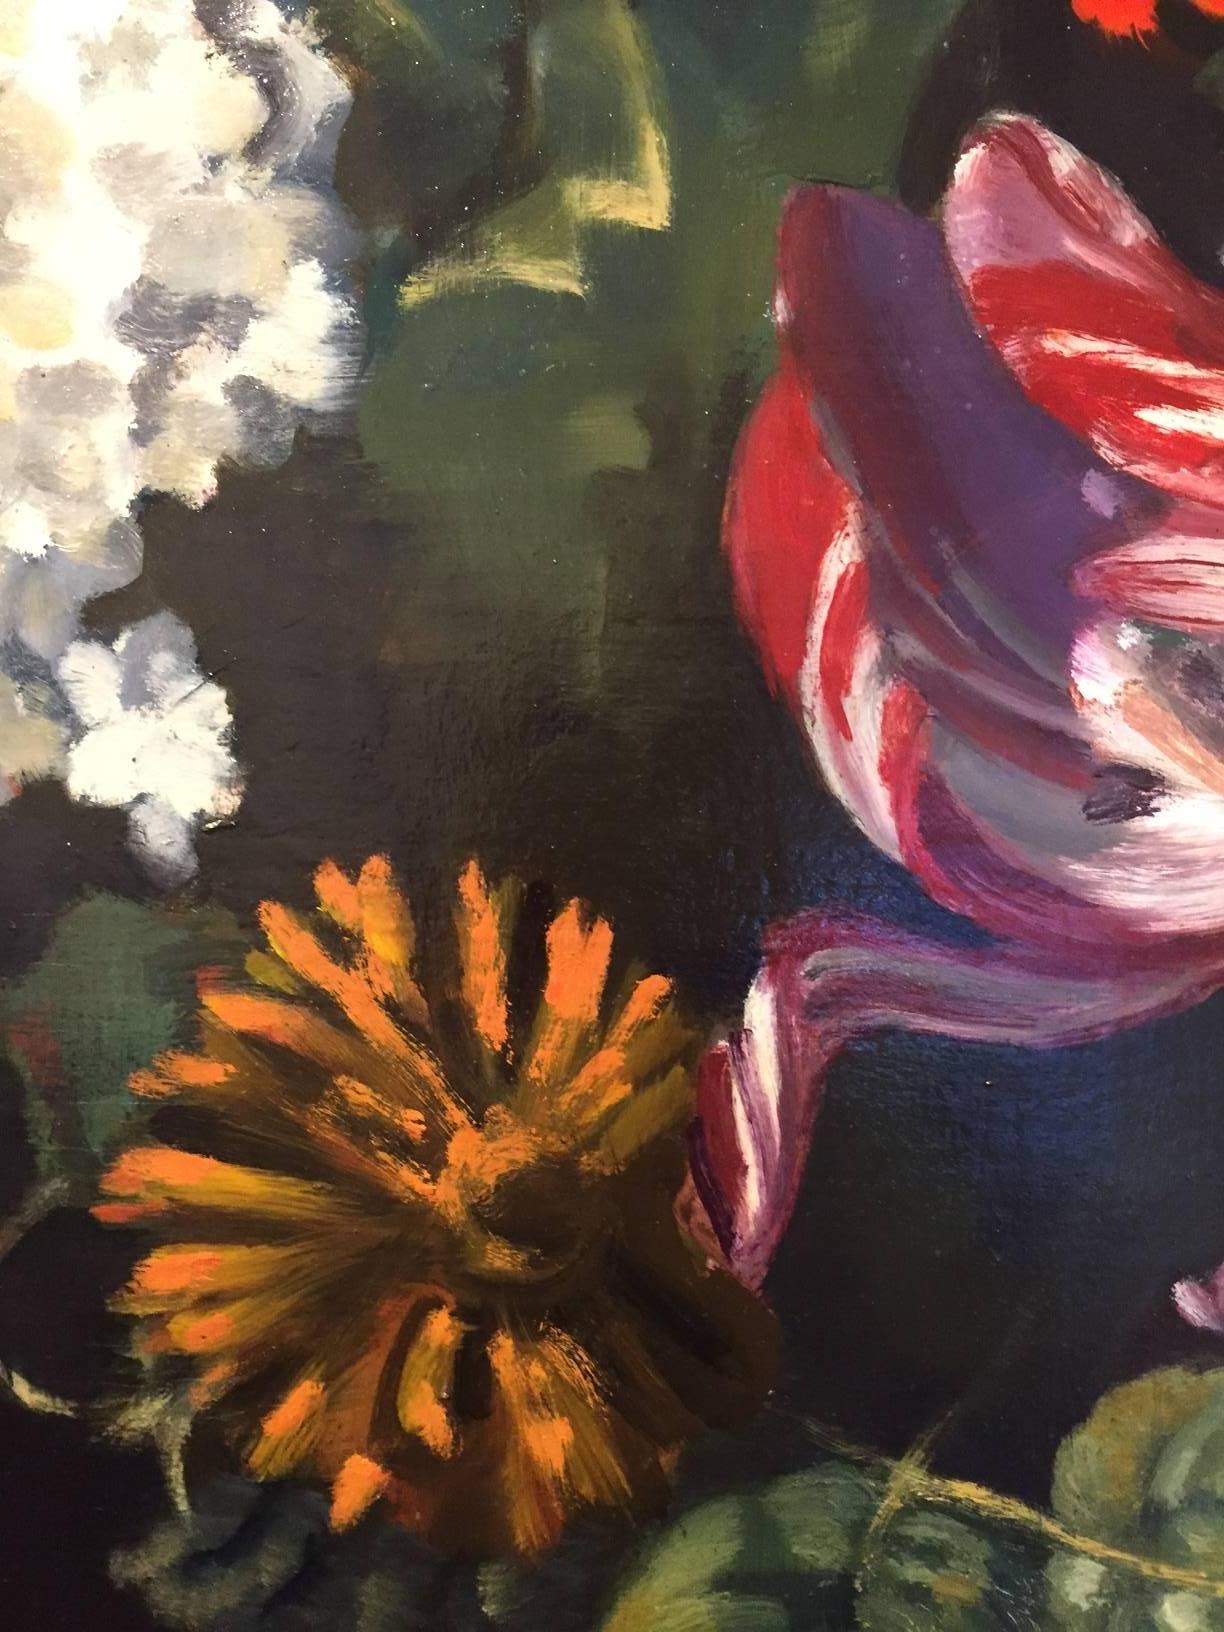 Stephanie Peek’s florally inspired oil paintings — where darkness and drama play central roles — speak metaphorically of the fragile beauty and ephemeral nature of the world. The lush and mysterious works inspired by evening gardens, are focused on